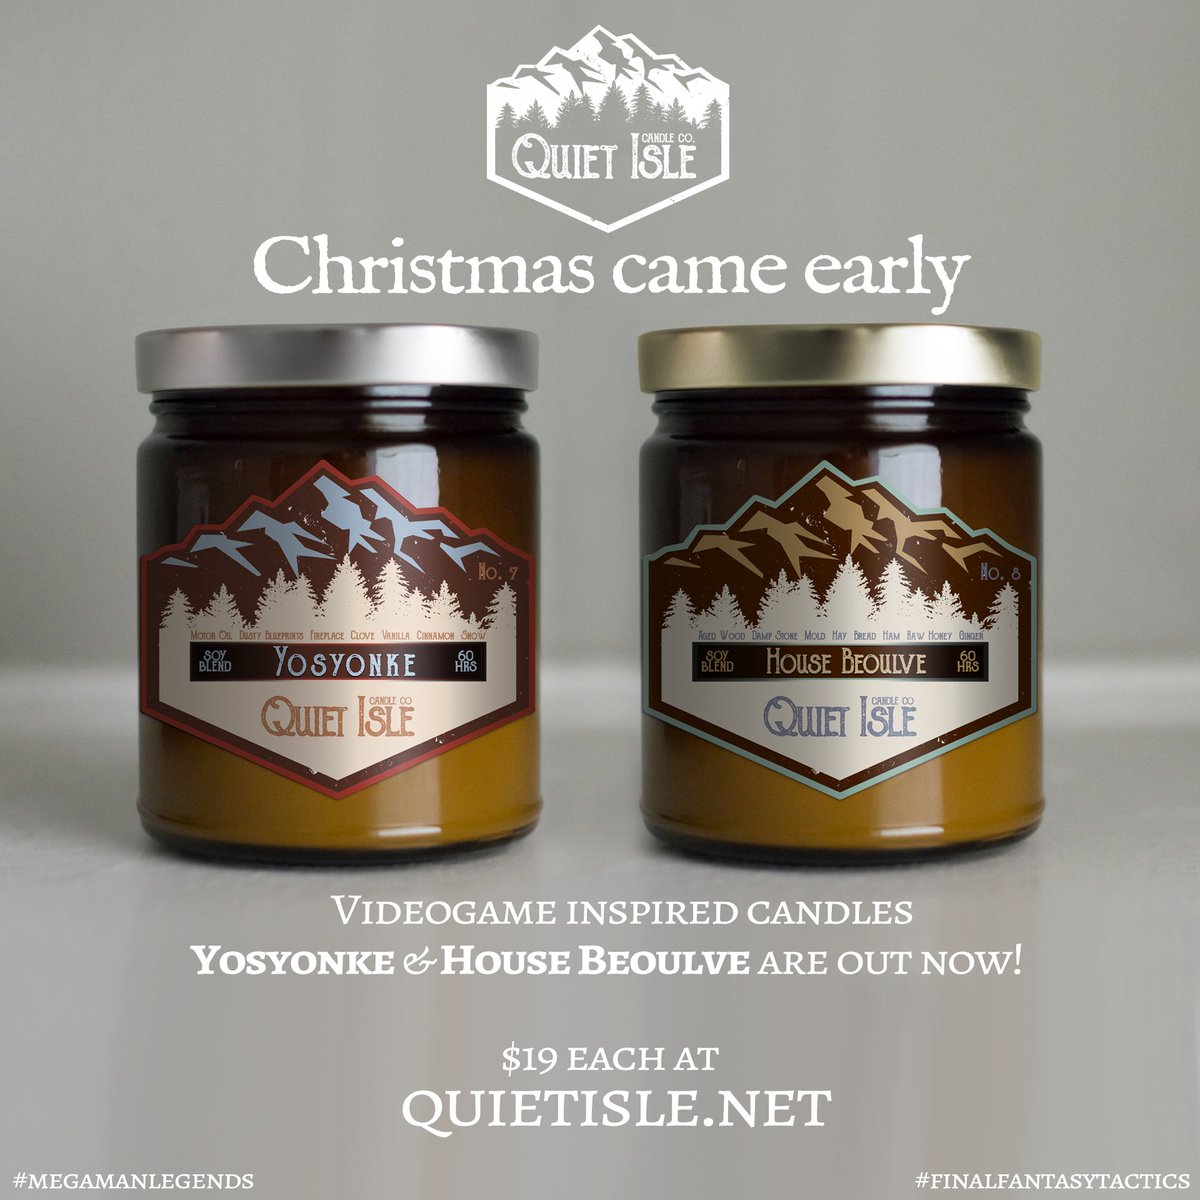 Our videogame inspired winter candles are out now at quietisle.net! #megamanlegends #finalfantasytactics #gamer #videogames #candle #VideoGamesChristmas